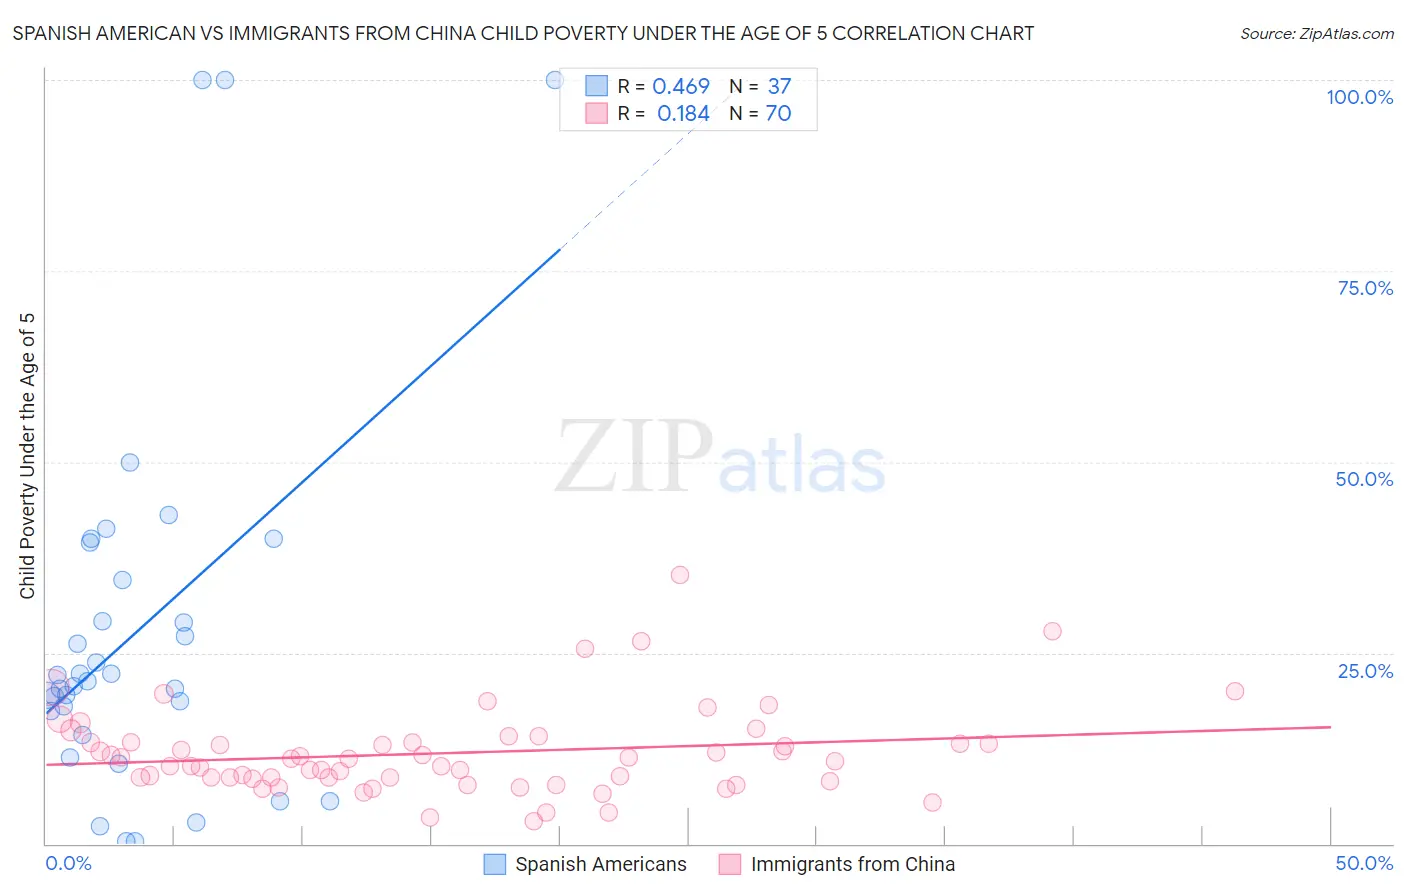 Spanish American vs Immigrants from China Child Poverty Under the Age of 5